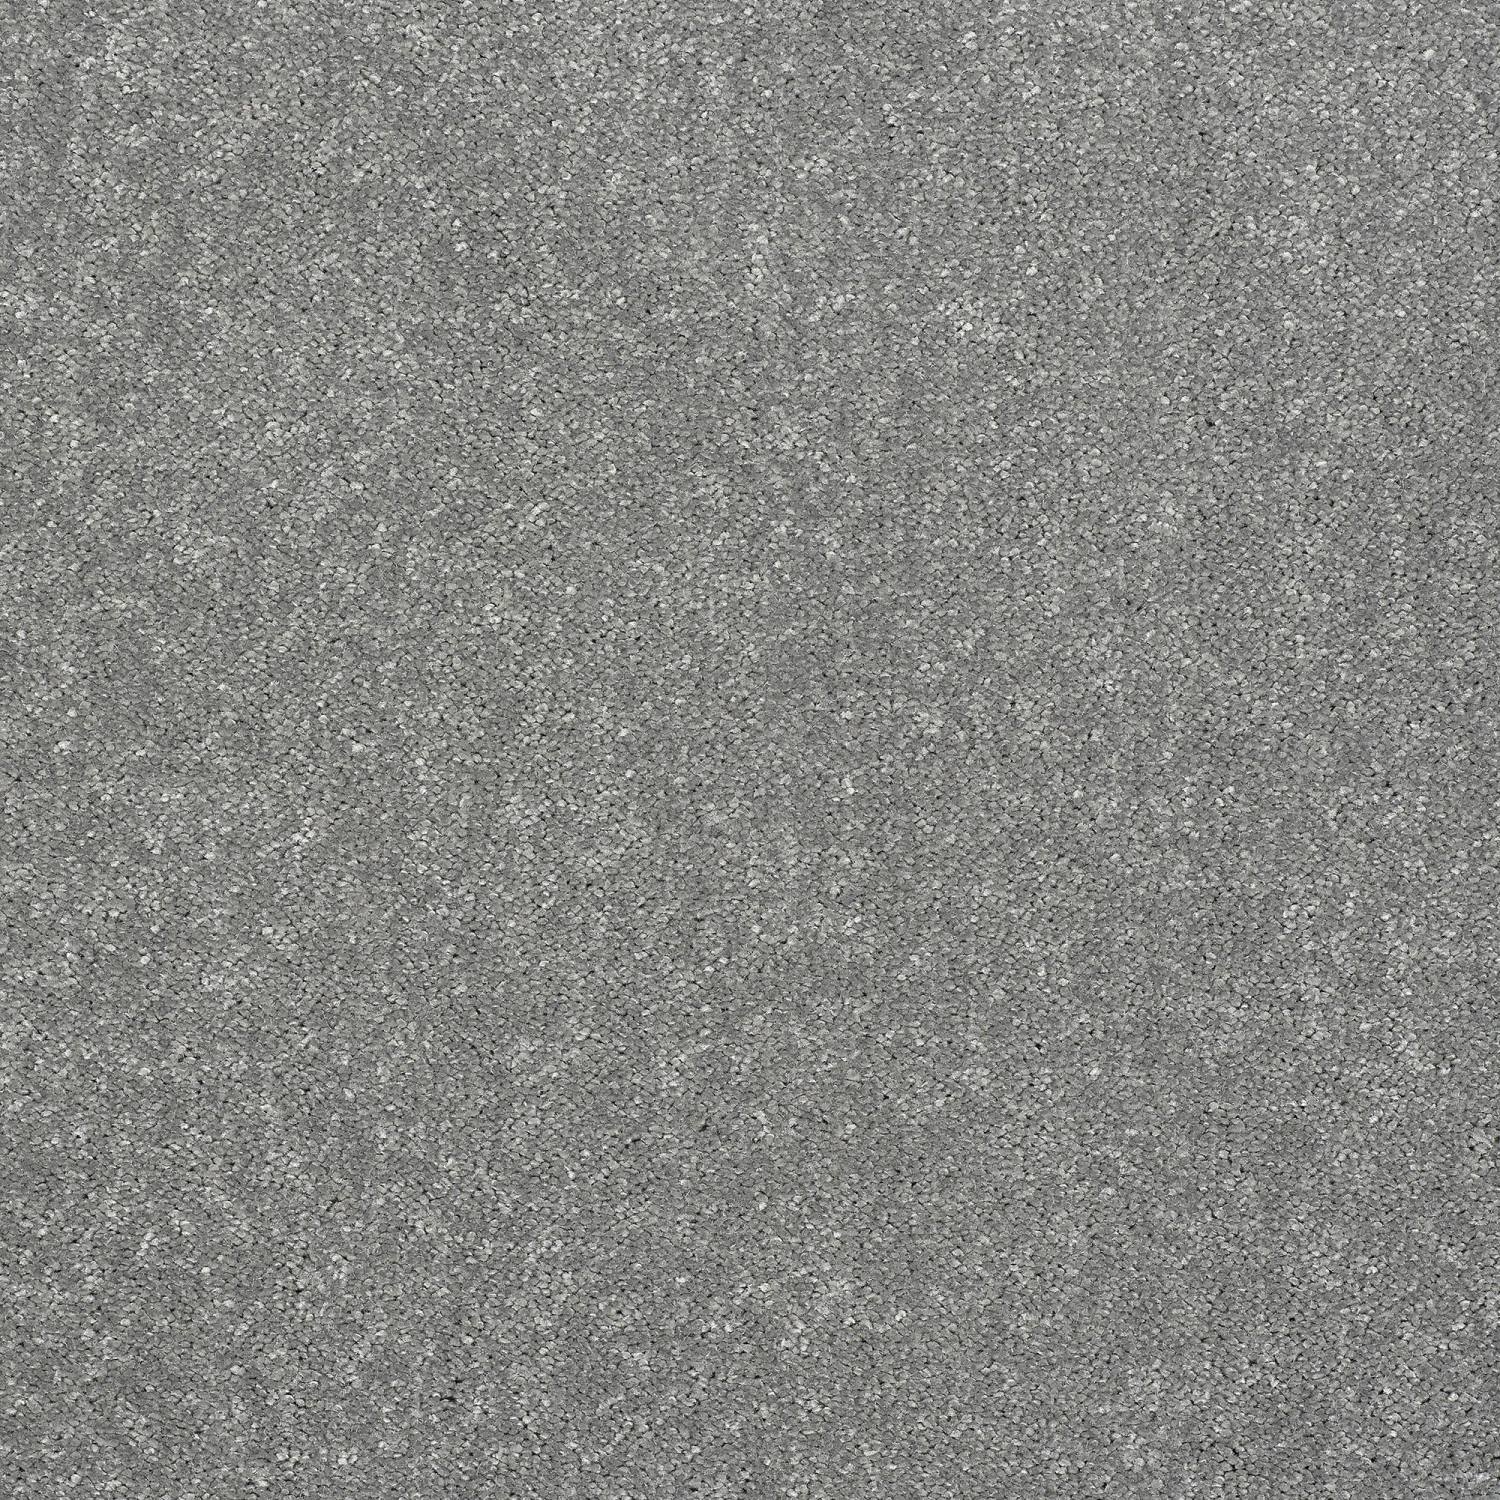 Stainfree Pure Elegance Soft Twist Carpet - Frosted Steel